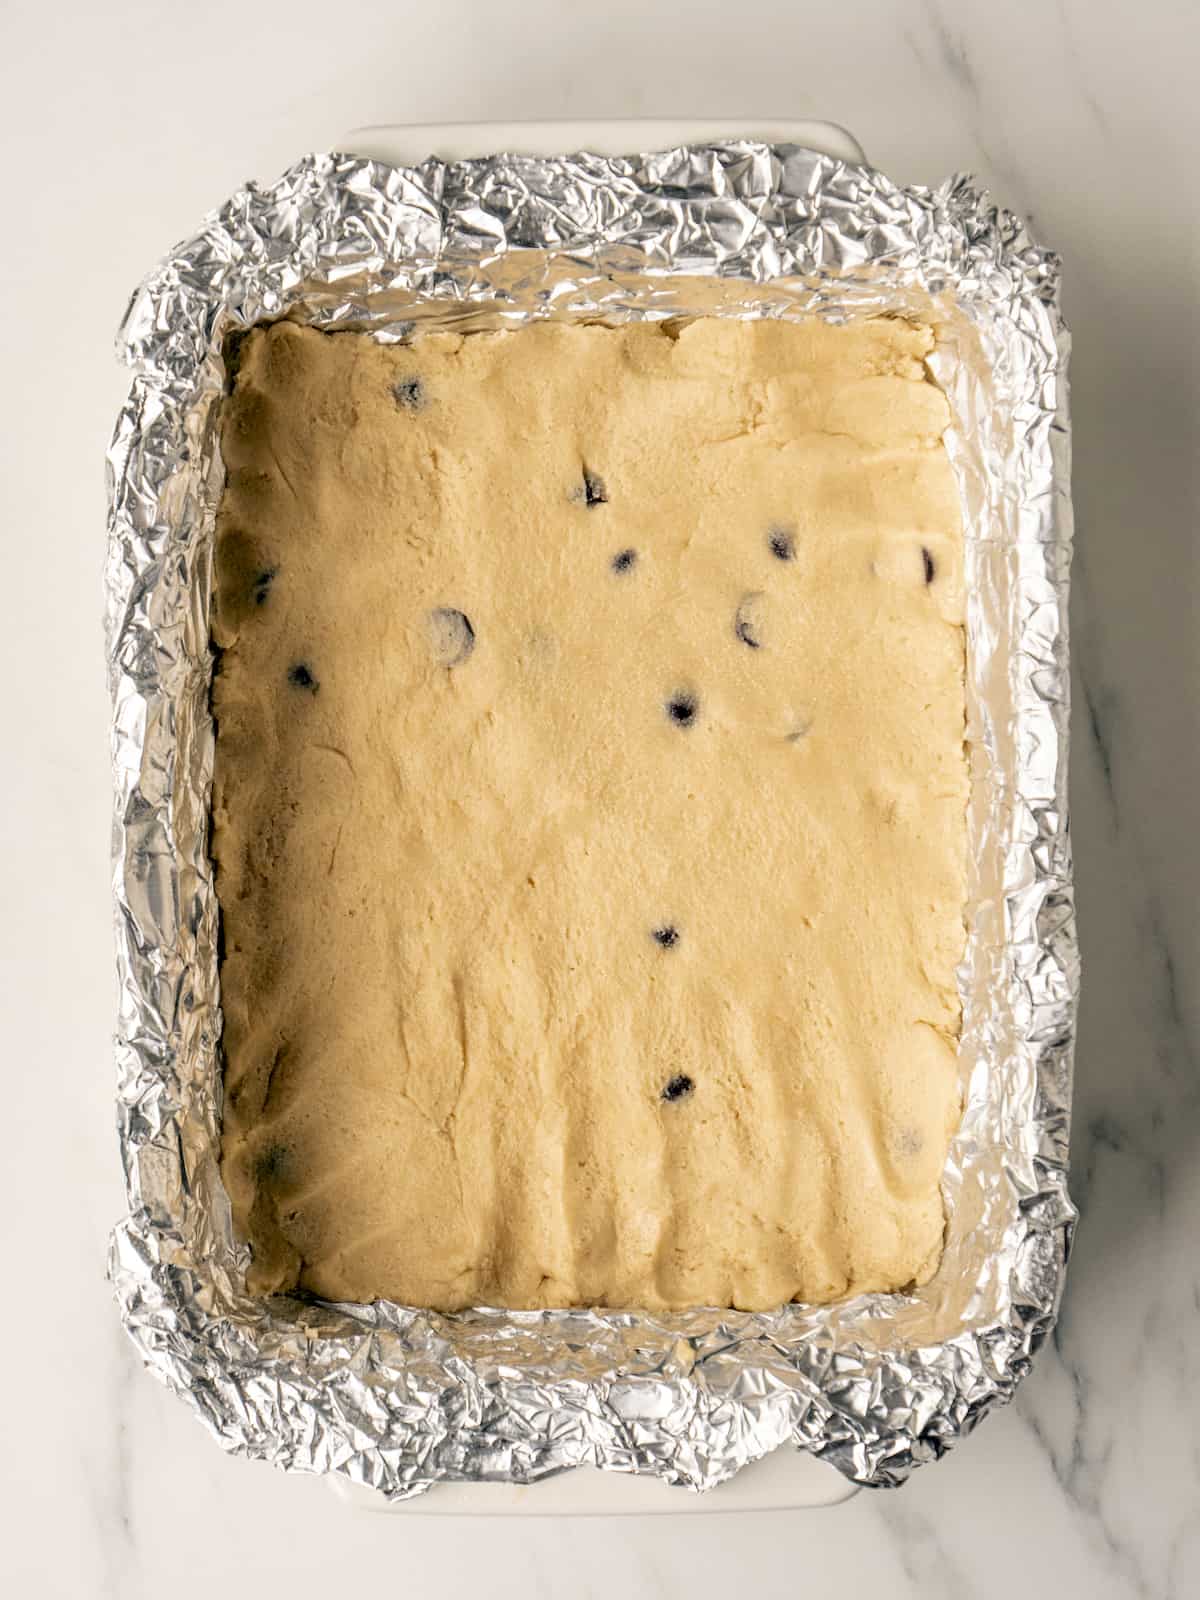 A 9x13 baking pan lined with tin foil with cookie dough pressed into the bottom of the pan into an even layer.